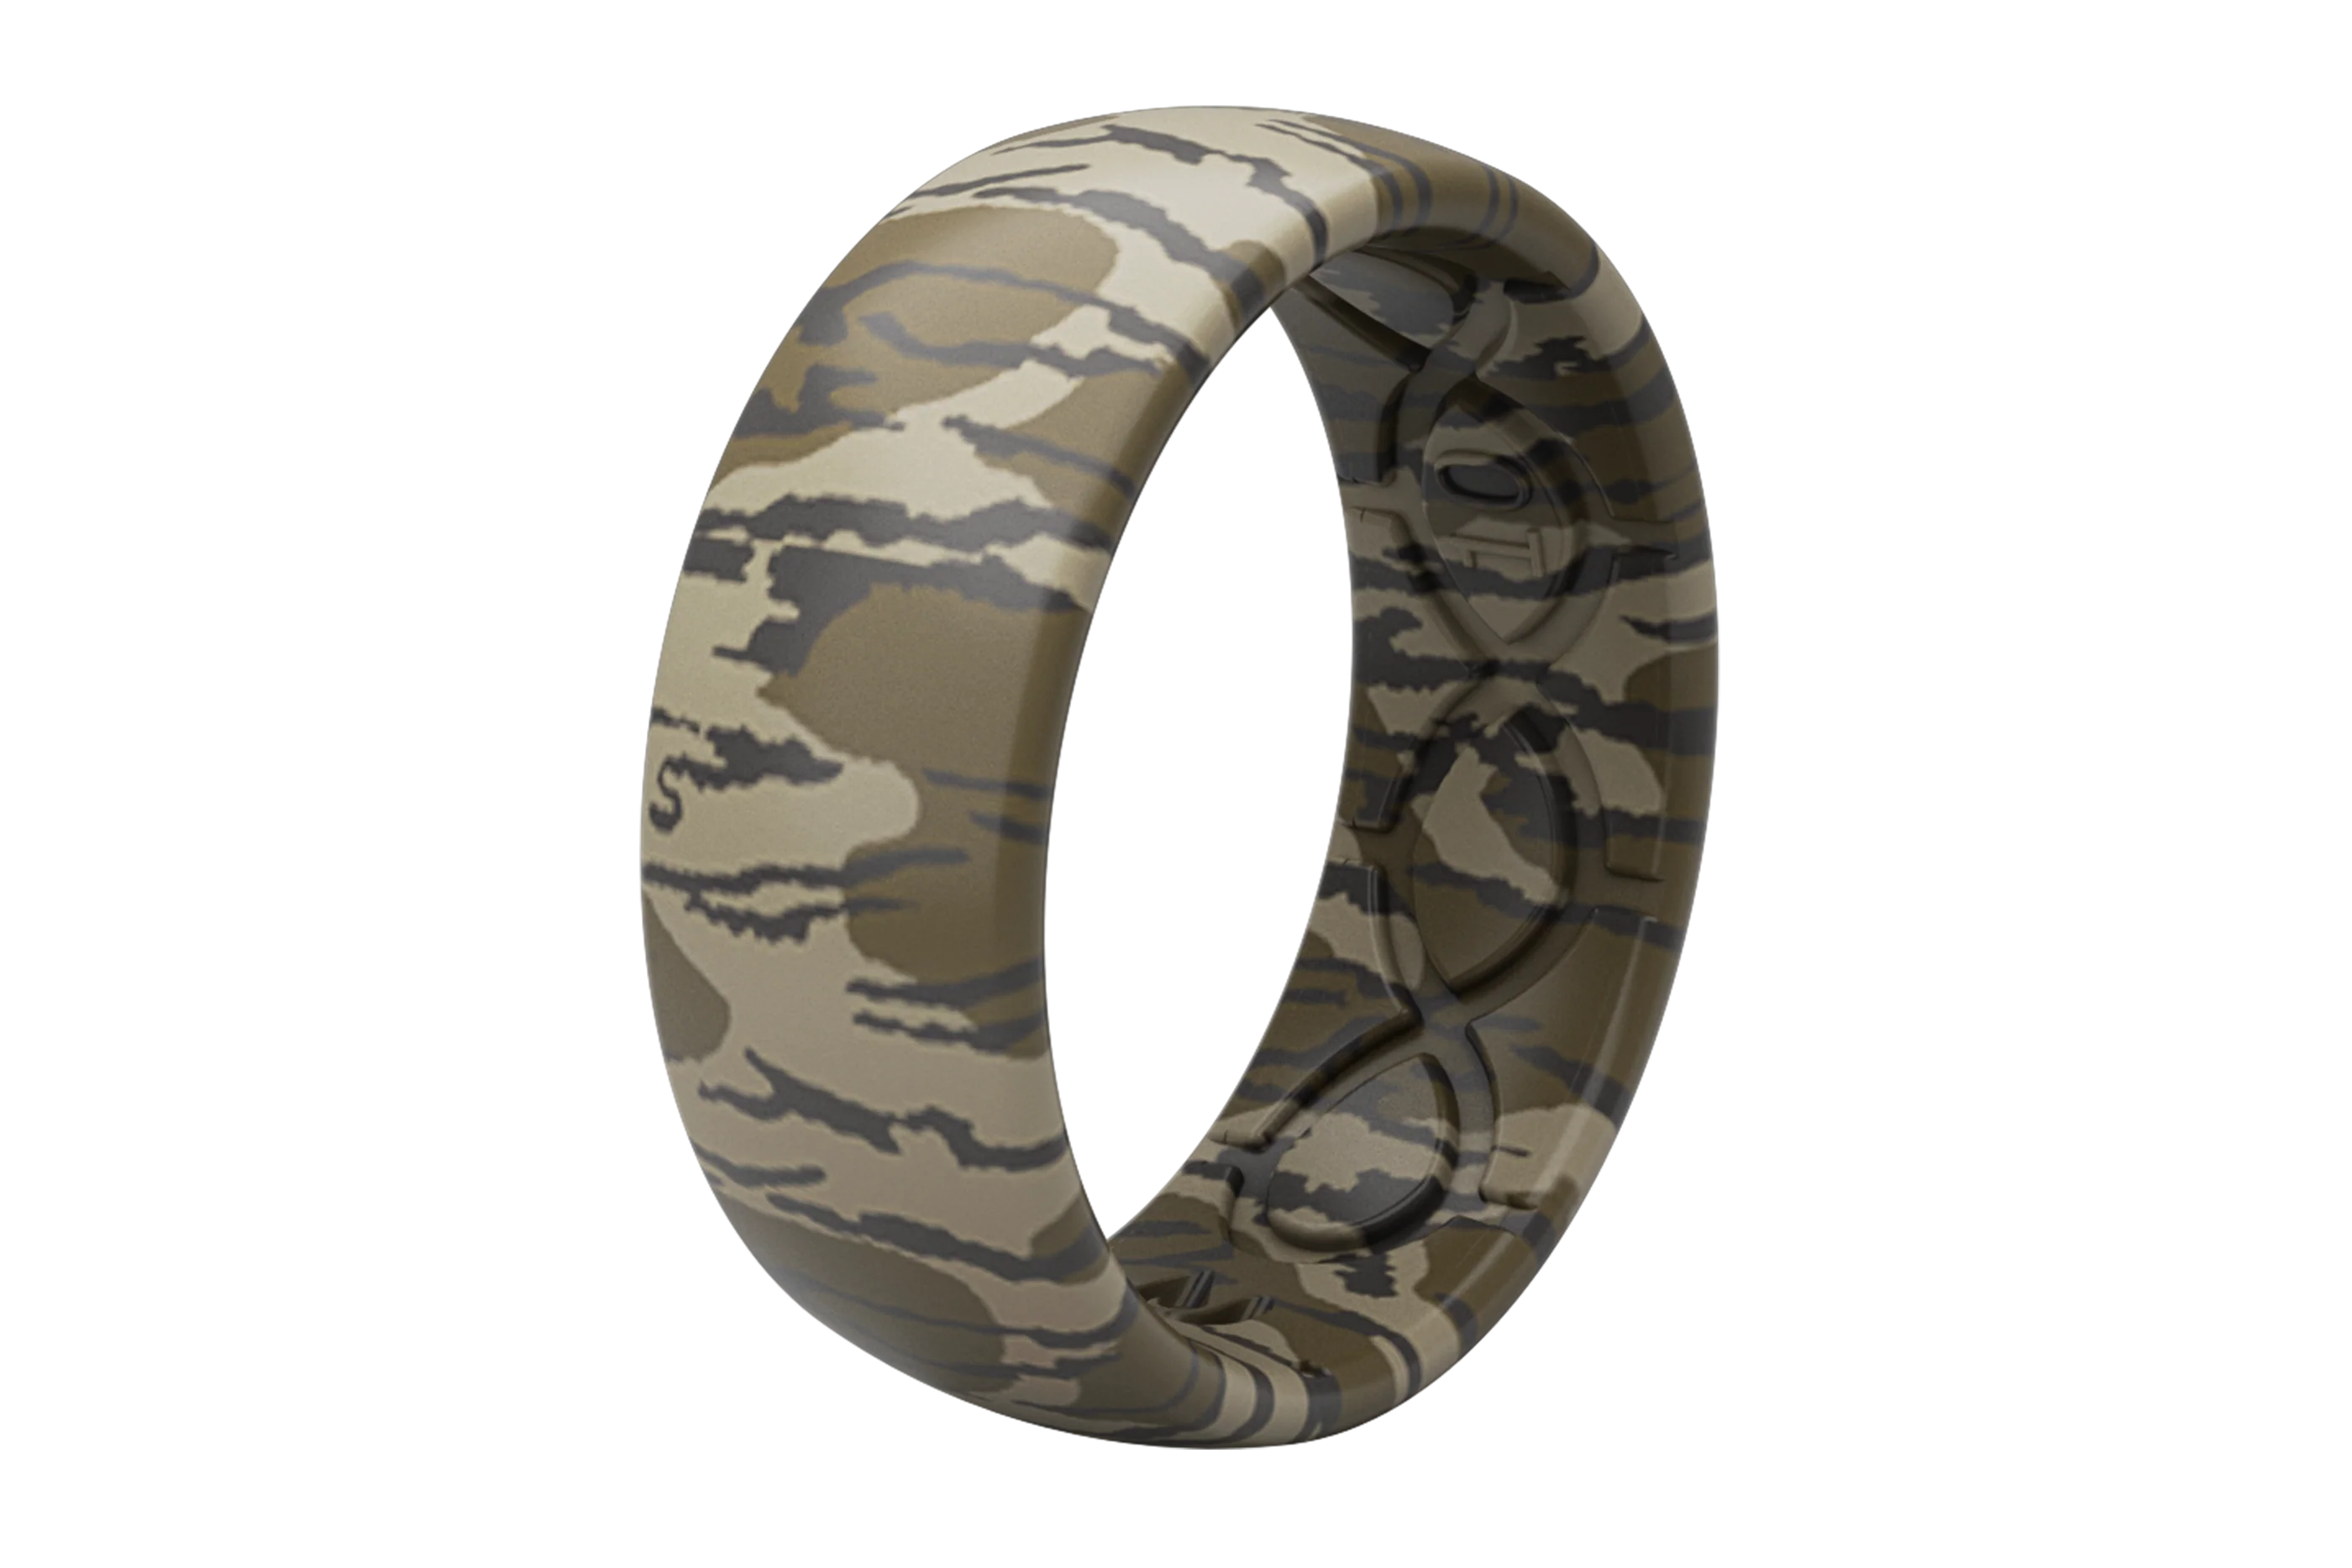 Groove Life Mens Bottomland Camo Ring-R6-003